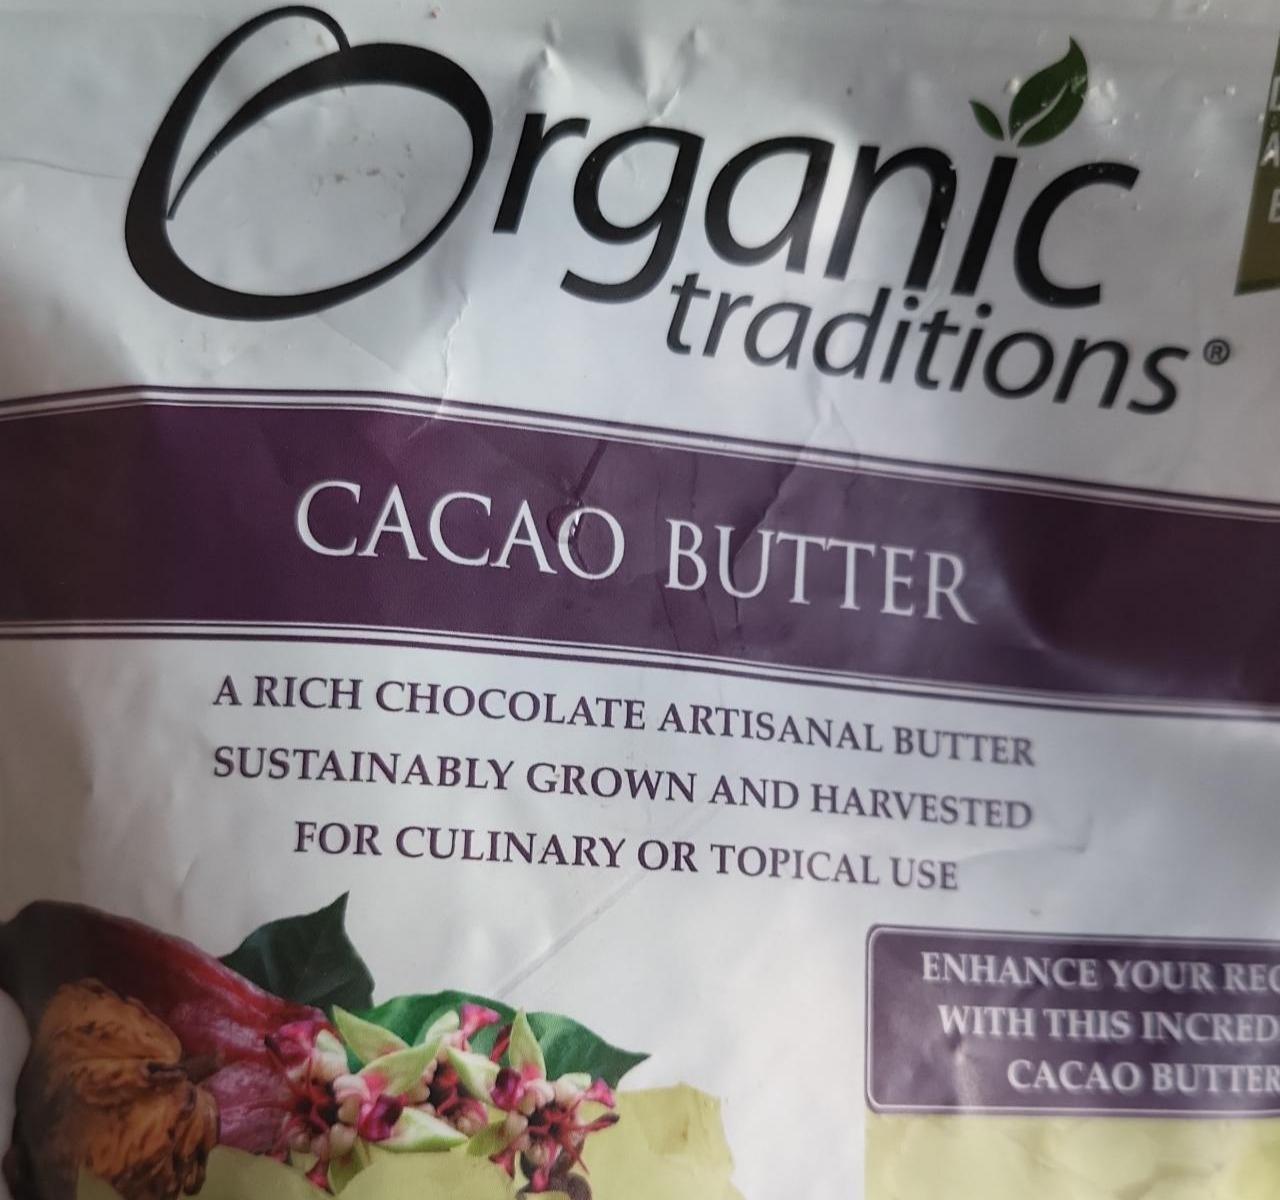 Фото - Cacao Butter Organic Traditions